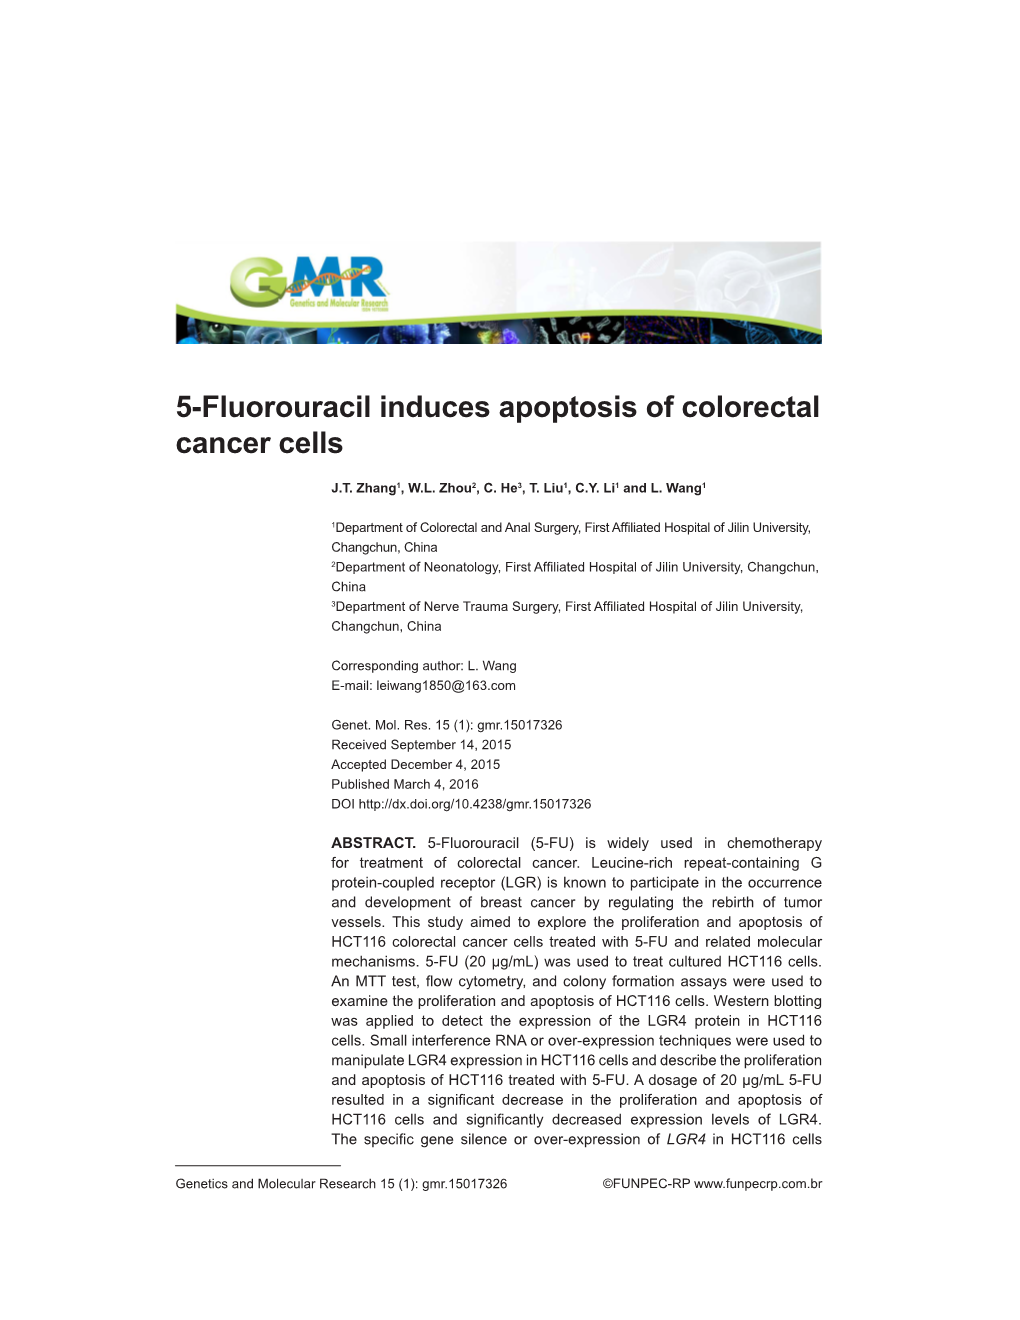 5-Fluorouracil Induces Apoptosis of Colorectal Cancer Cells